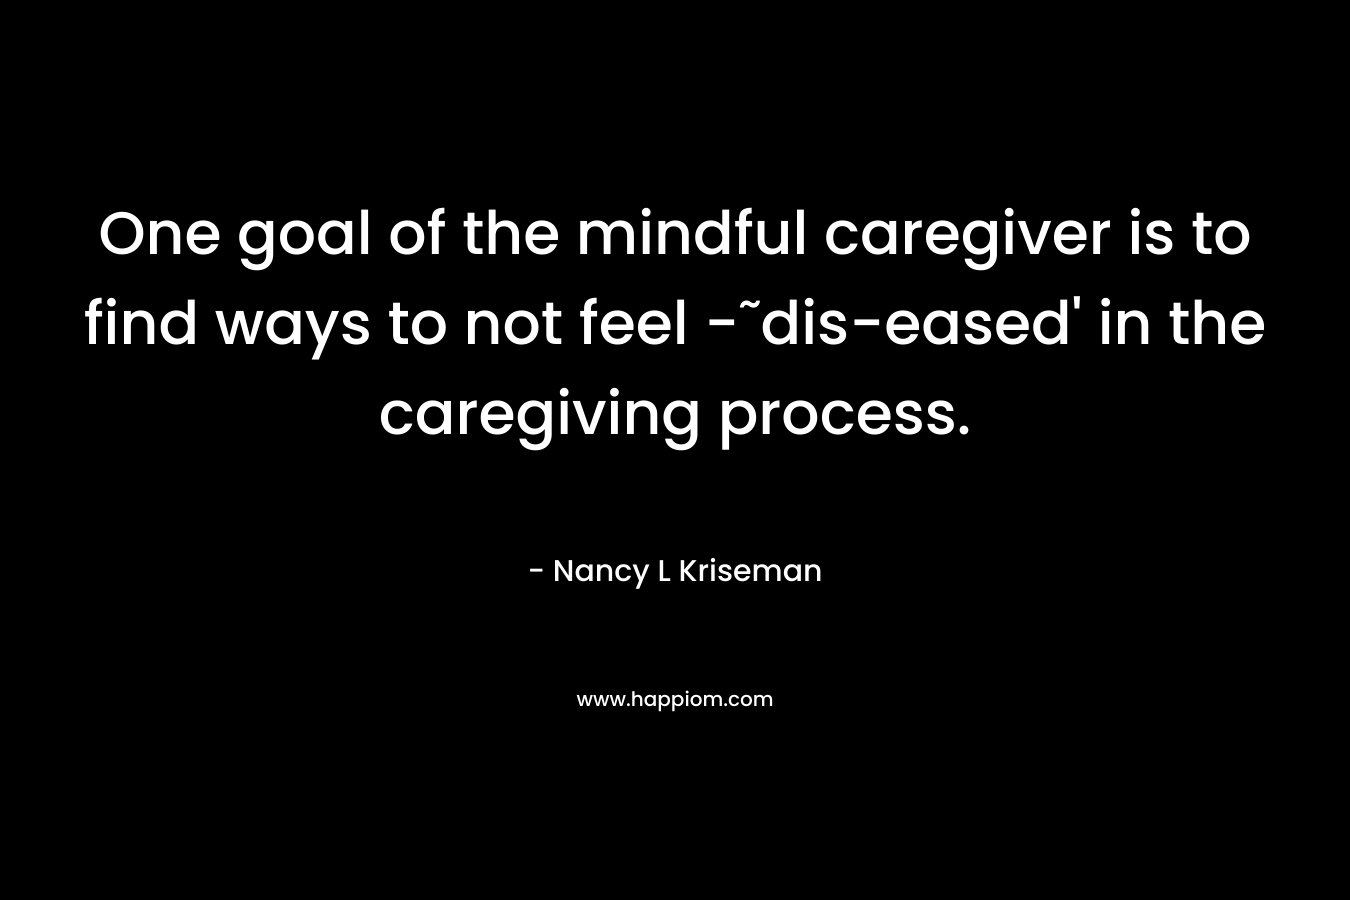 One goal of the mindful caregiver is to find ways to not feel -˜dis-eased' in the caregiving process.